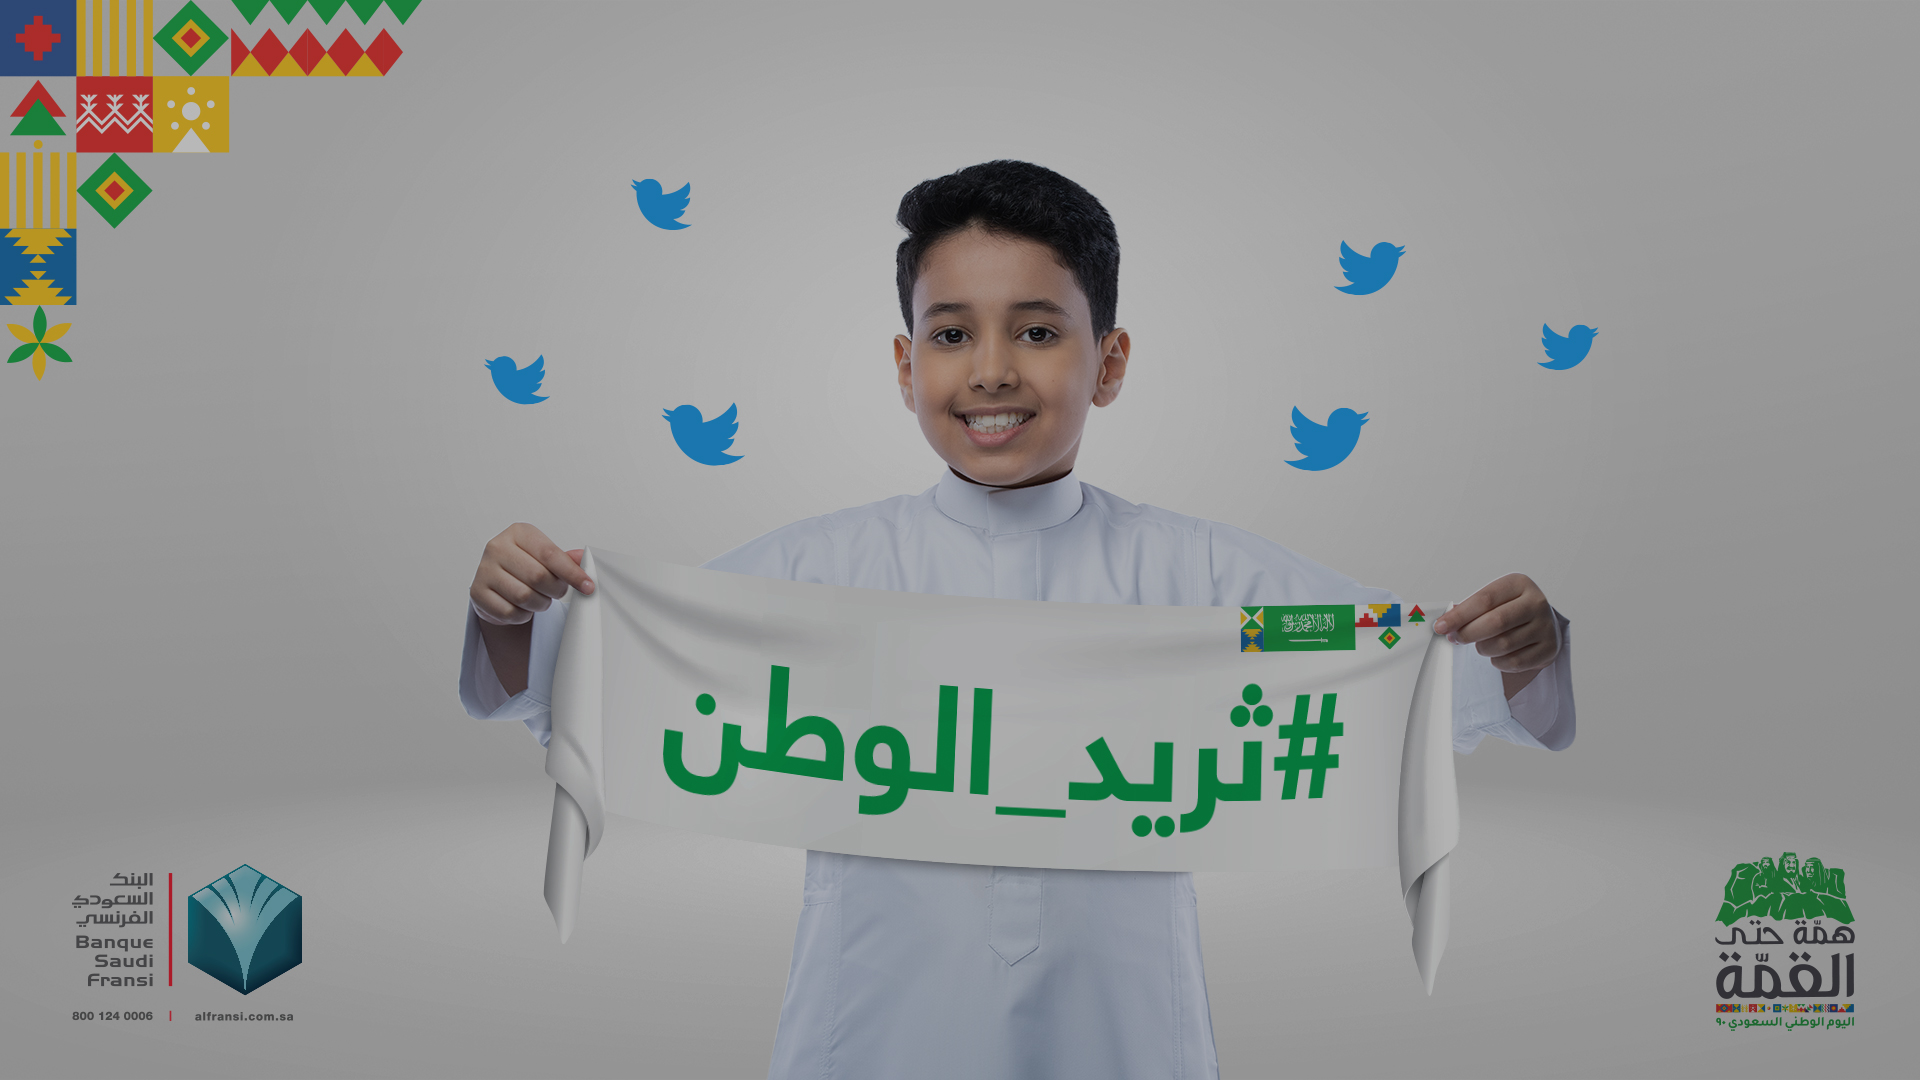 “2019 National Day Campaign” Taking pride of our country’s greatness